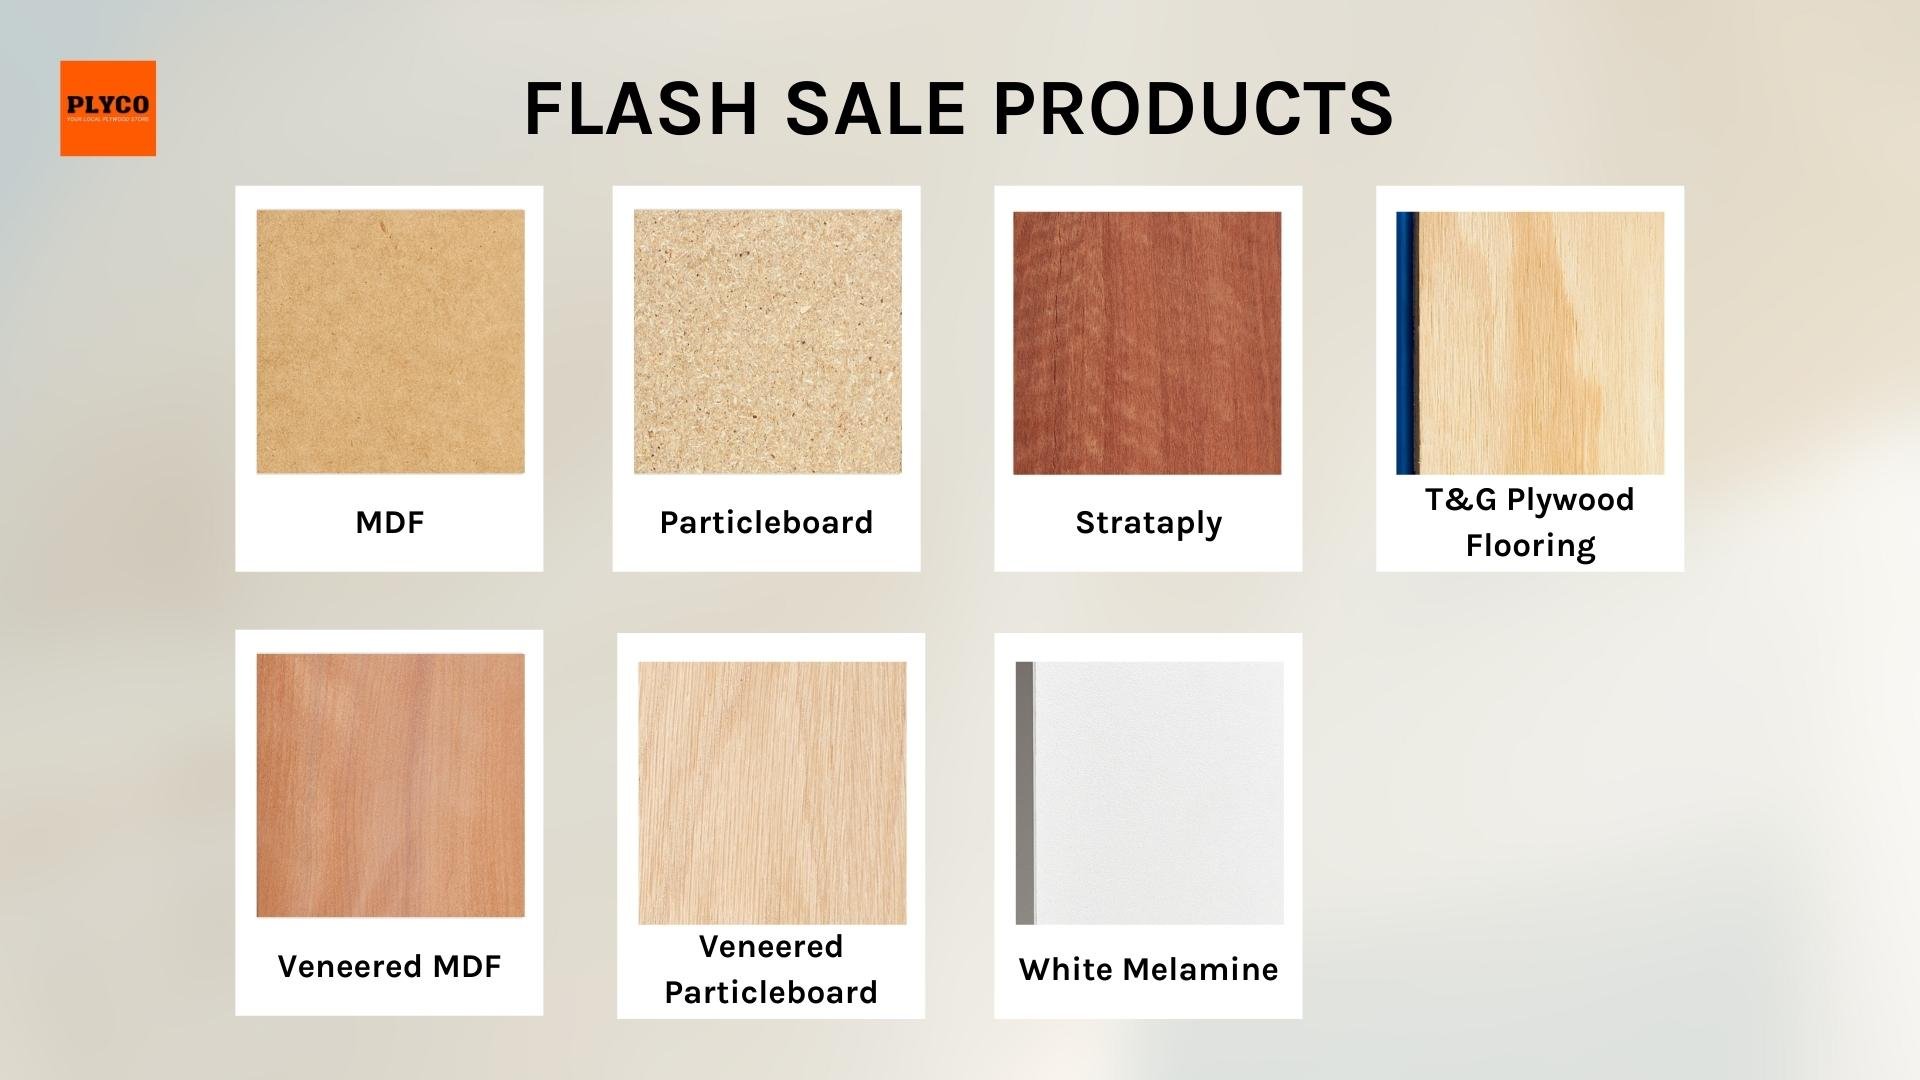 More plywood and veneered particleboard products available during Plyco's April 2022 Flash Sale